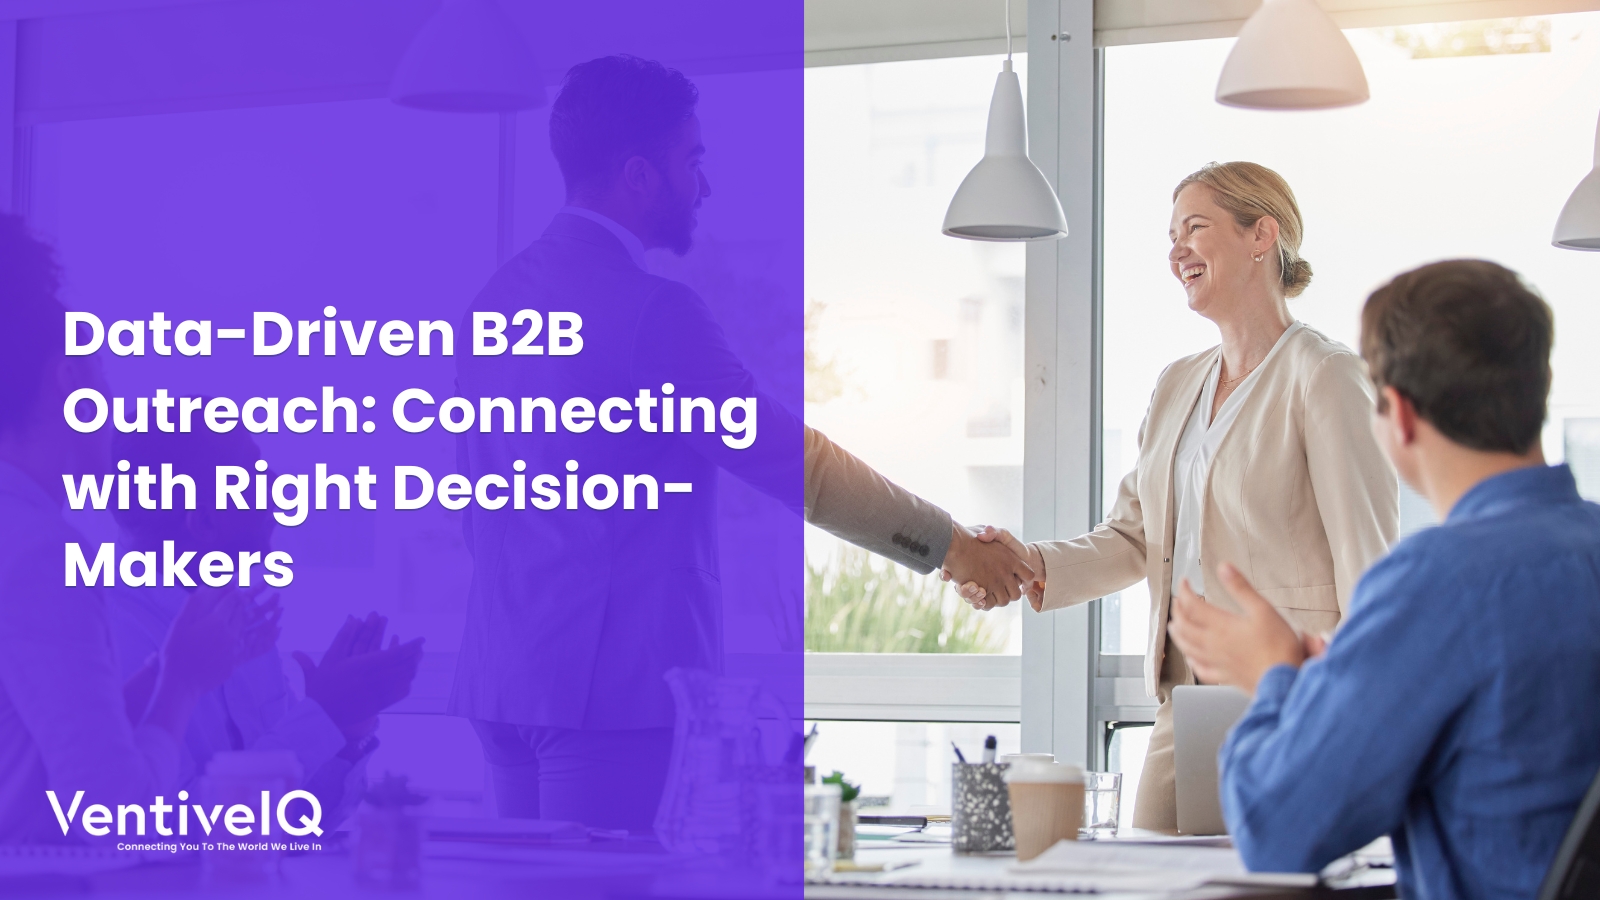 Data-Driven B2B Outreach: Connecting with Right Decision-Makers